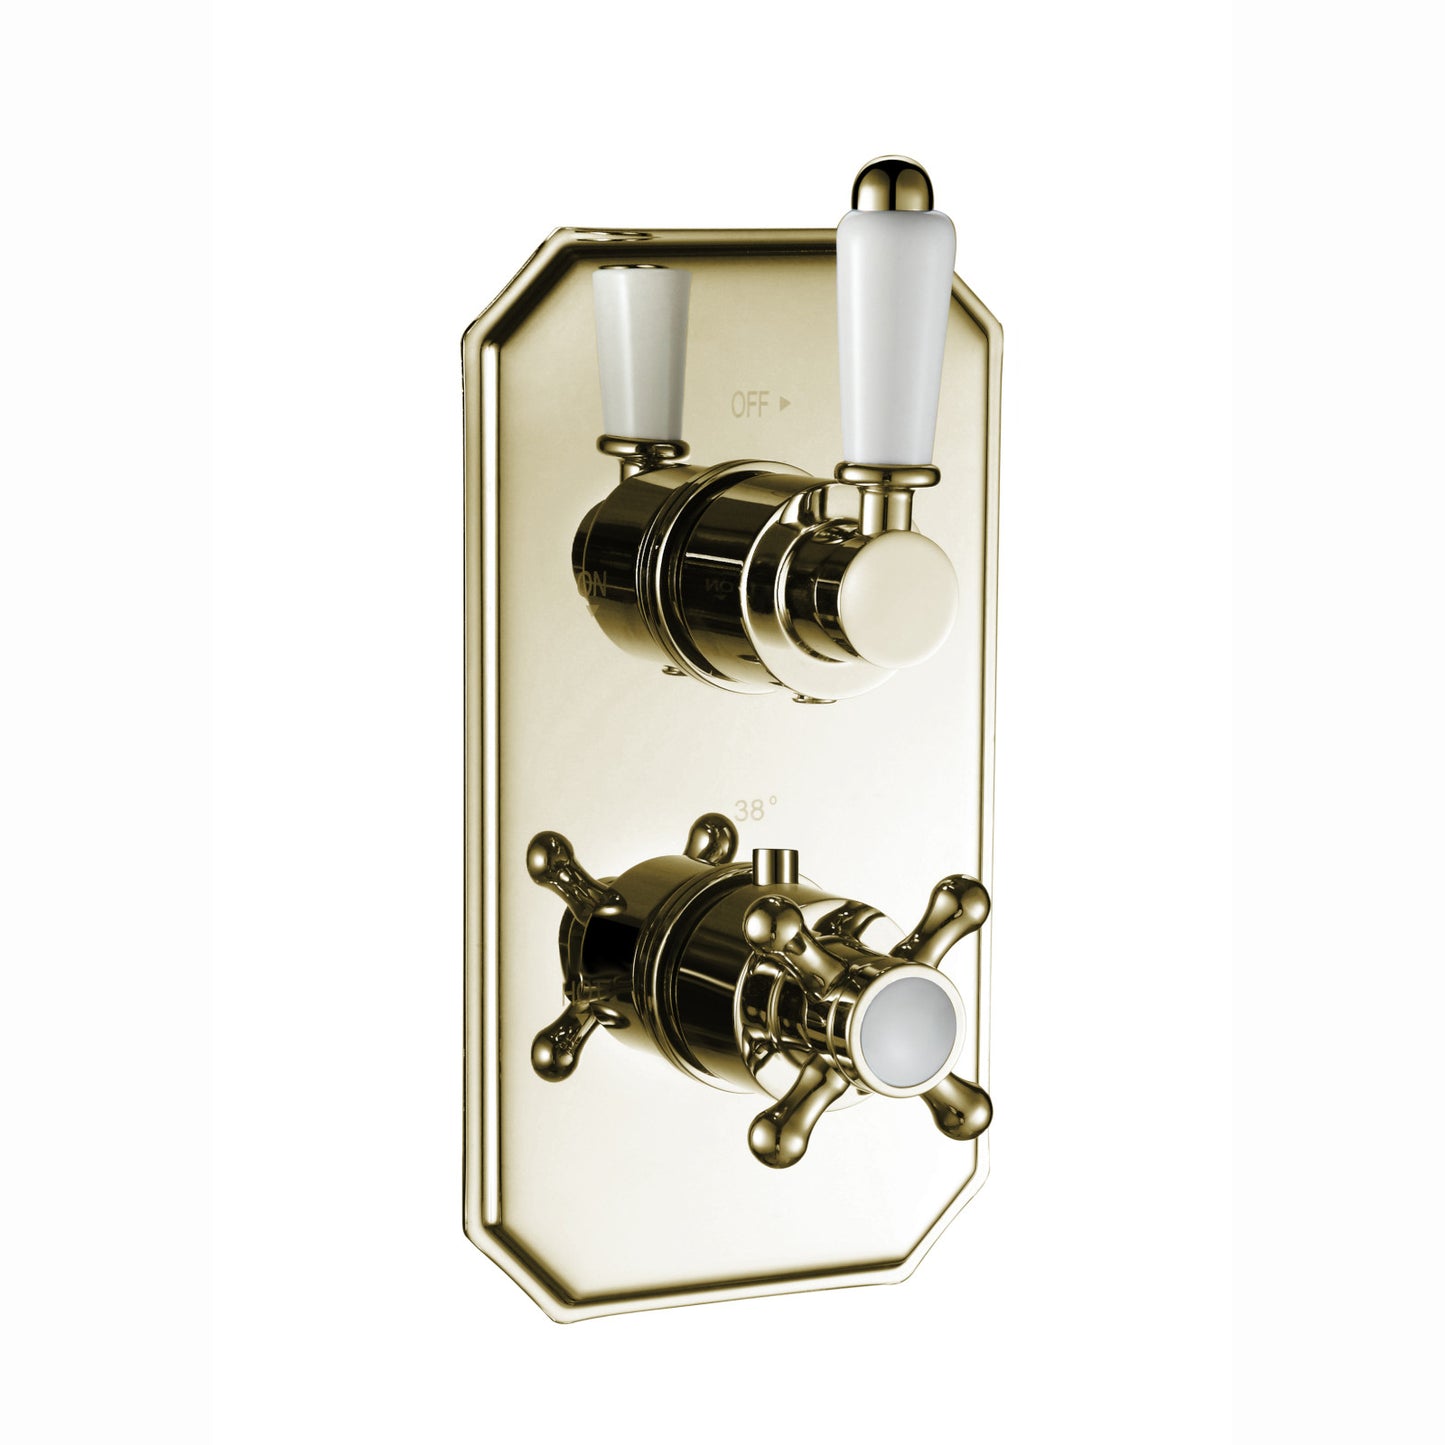 SH0253-06-TSV035-02-regent-traditional-crosshead-and-white-lever-concealed-thermostatic-twin-shower-valve-with-1-outlet-english-gold